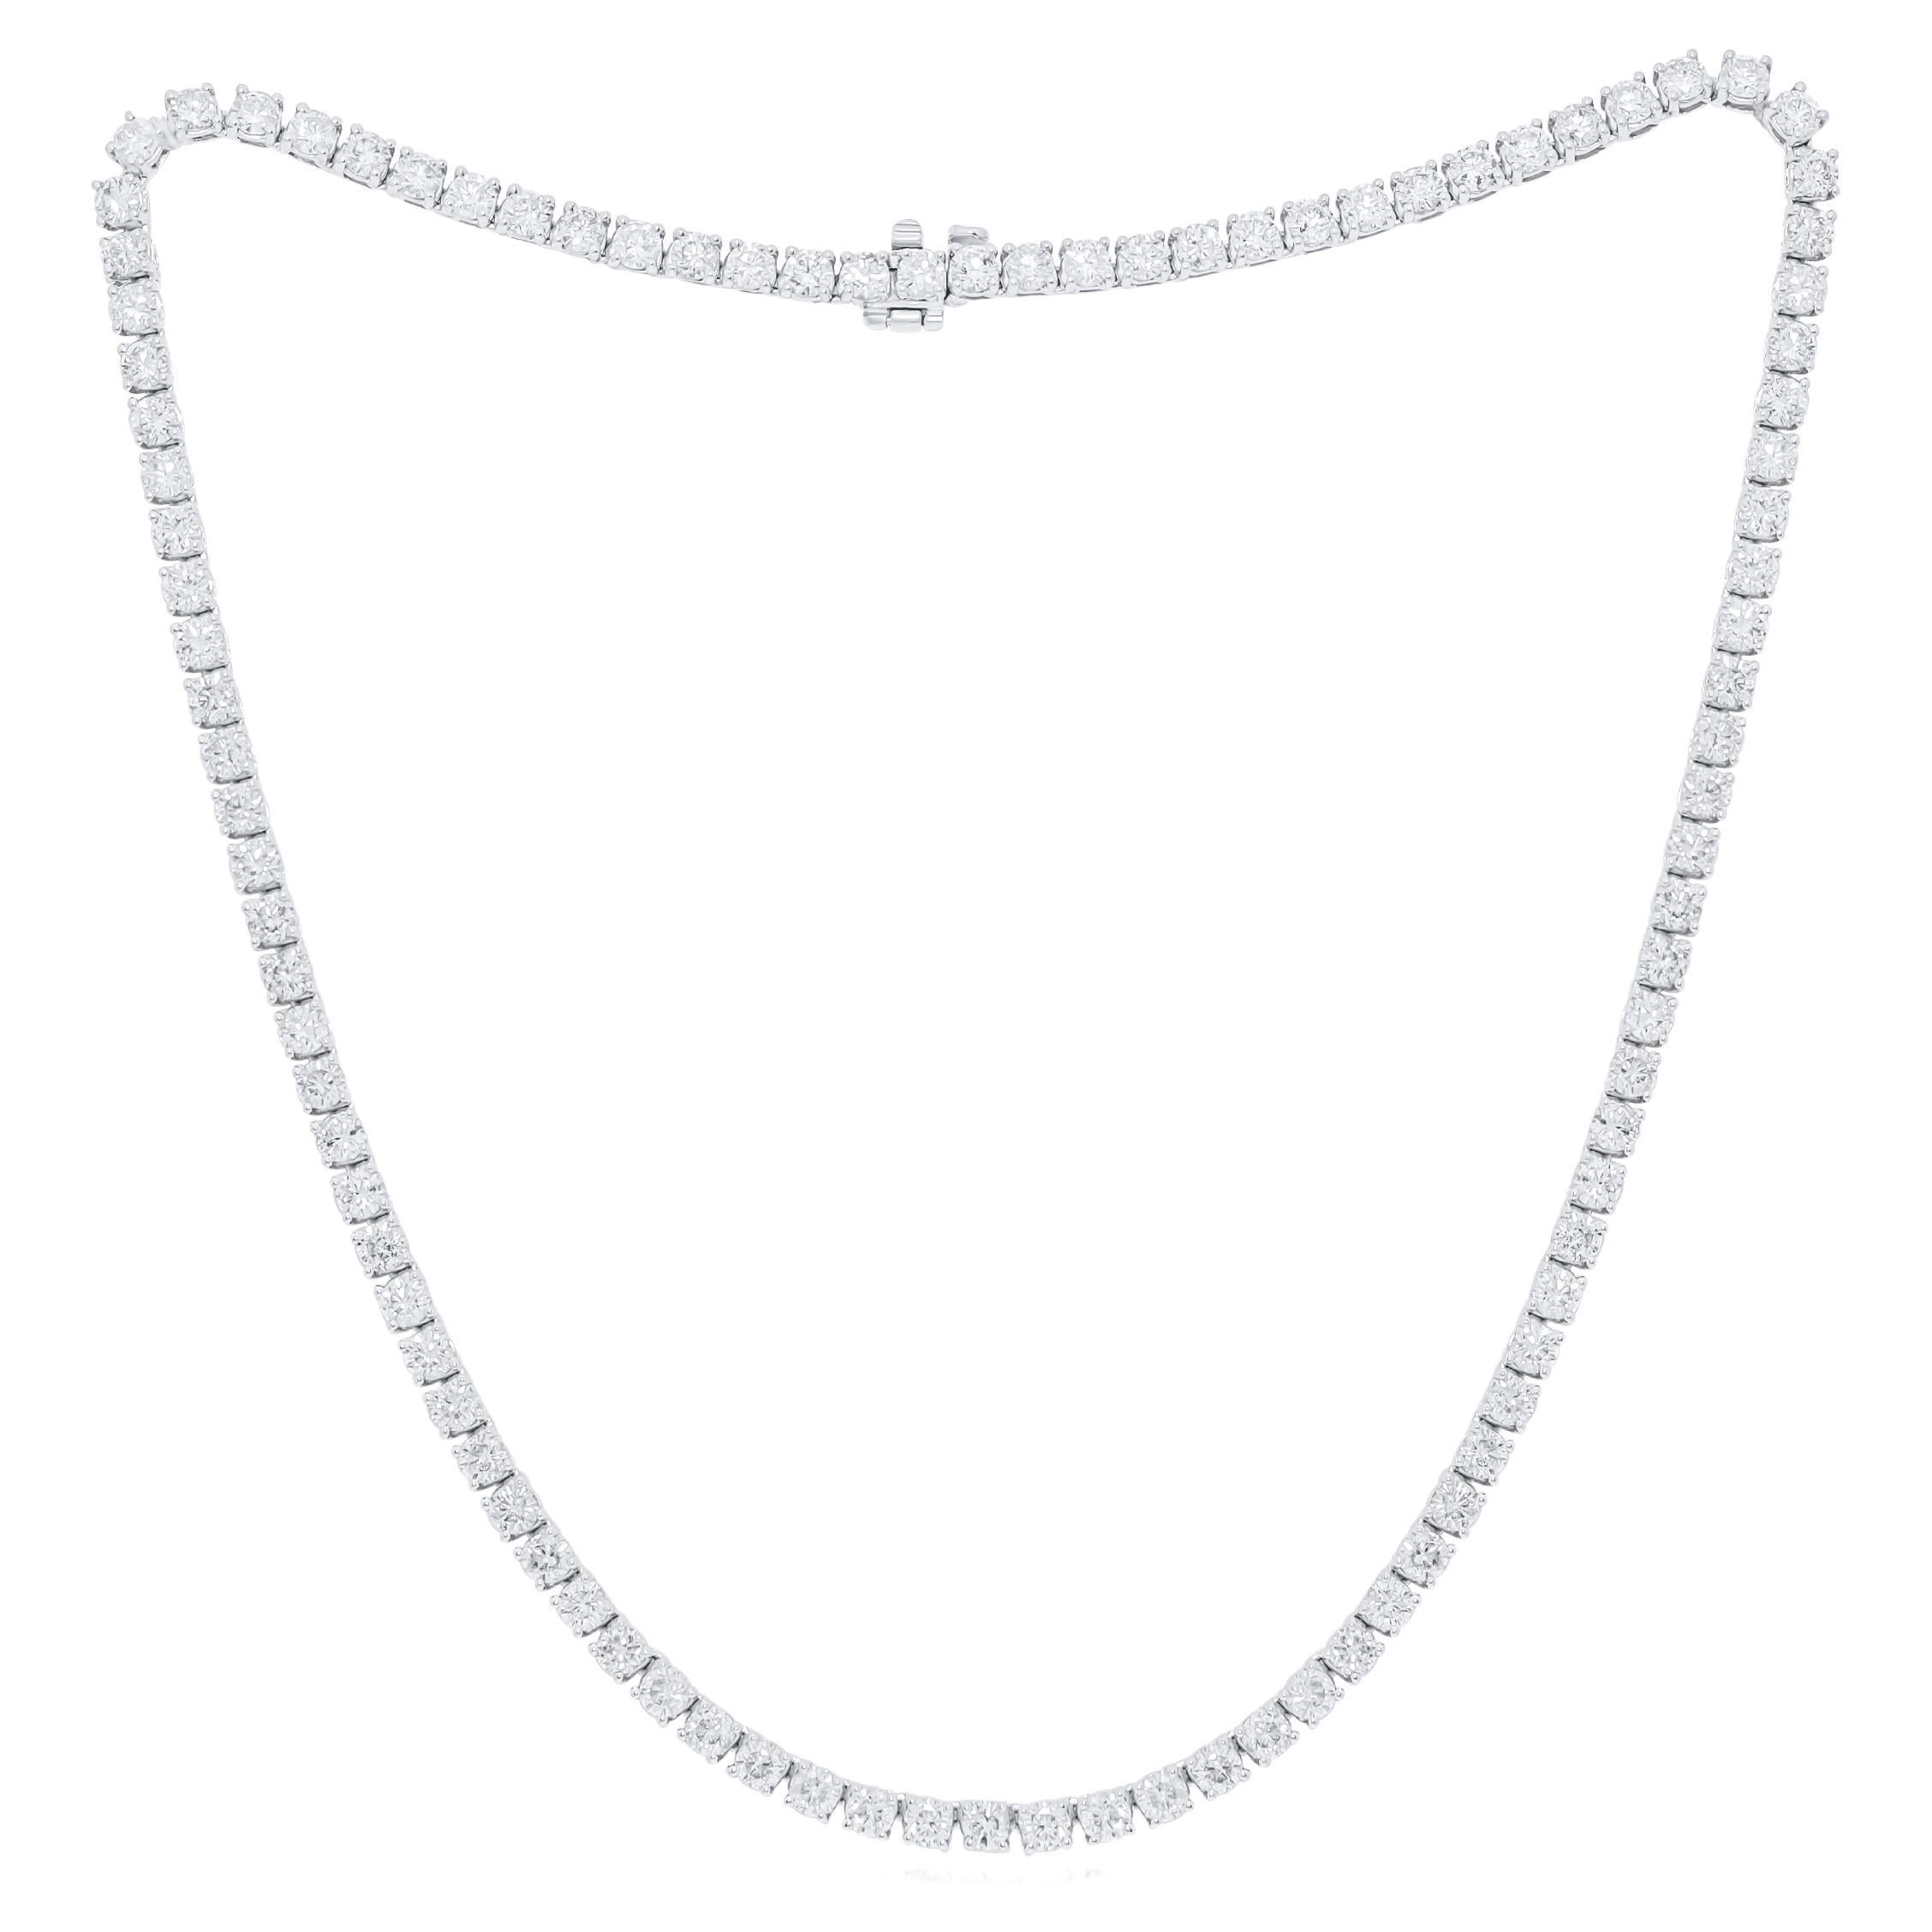 Diana M. Jewels Custom18 kt  White Gold 4 Prong Diamond Tennis Necklace 23.05ct For Sale